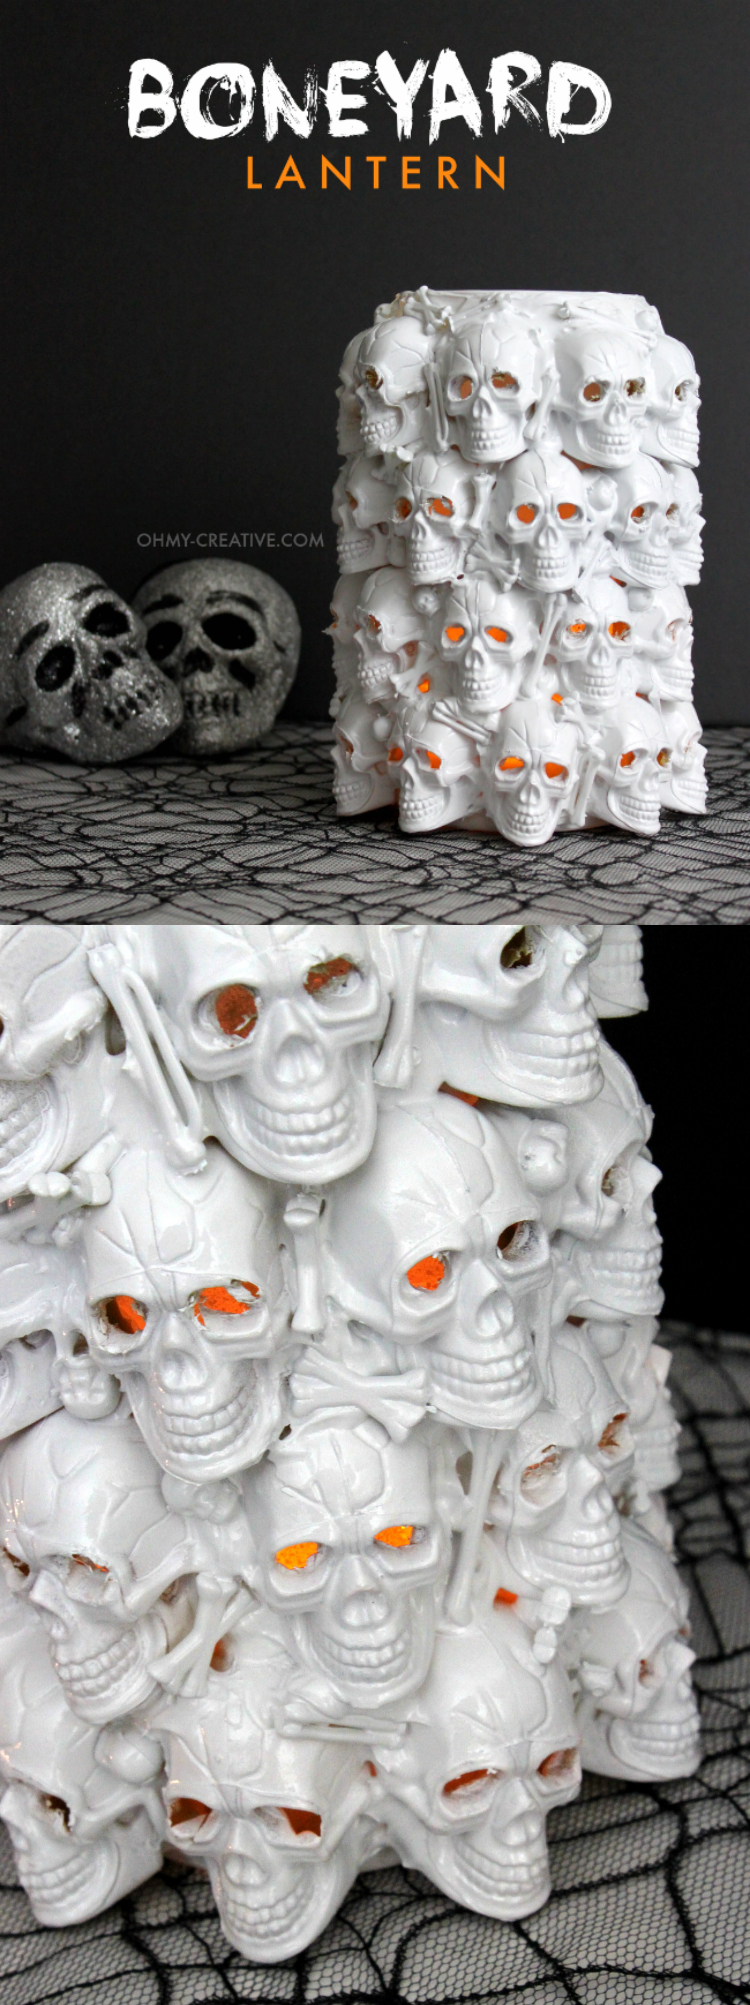 See how I made this Boneyard Lantern from plastic skulls, a dollar store necklace and a few other odd things to make this skull Pottery Barn knockoff. Absolutely one of the coolest things I have ever made!   |  OHMY-CREATIVE.COM